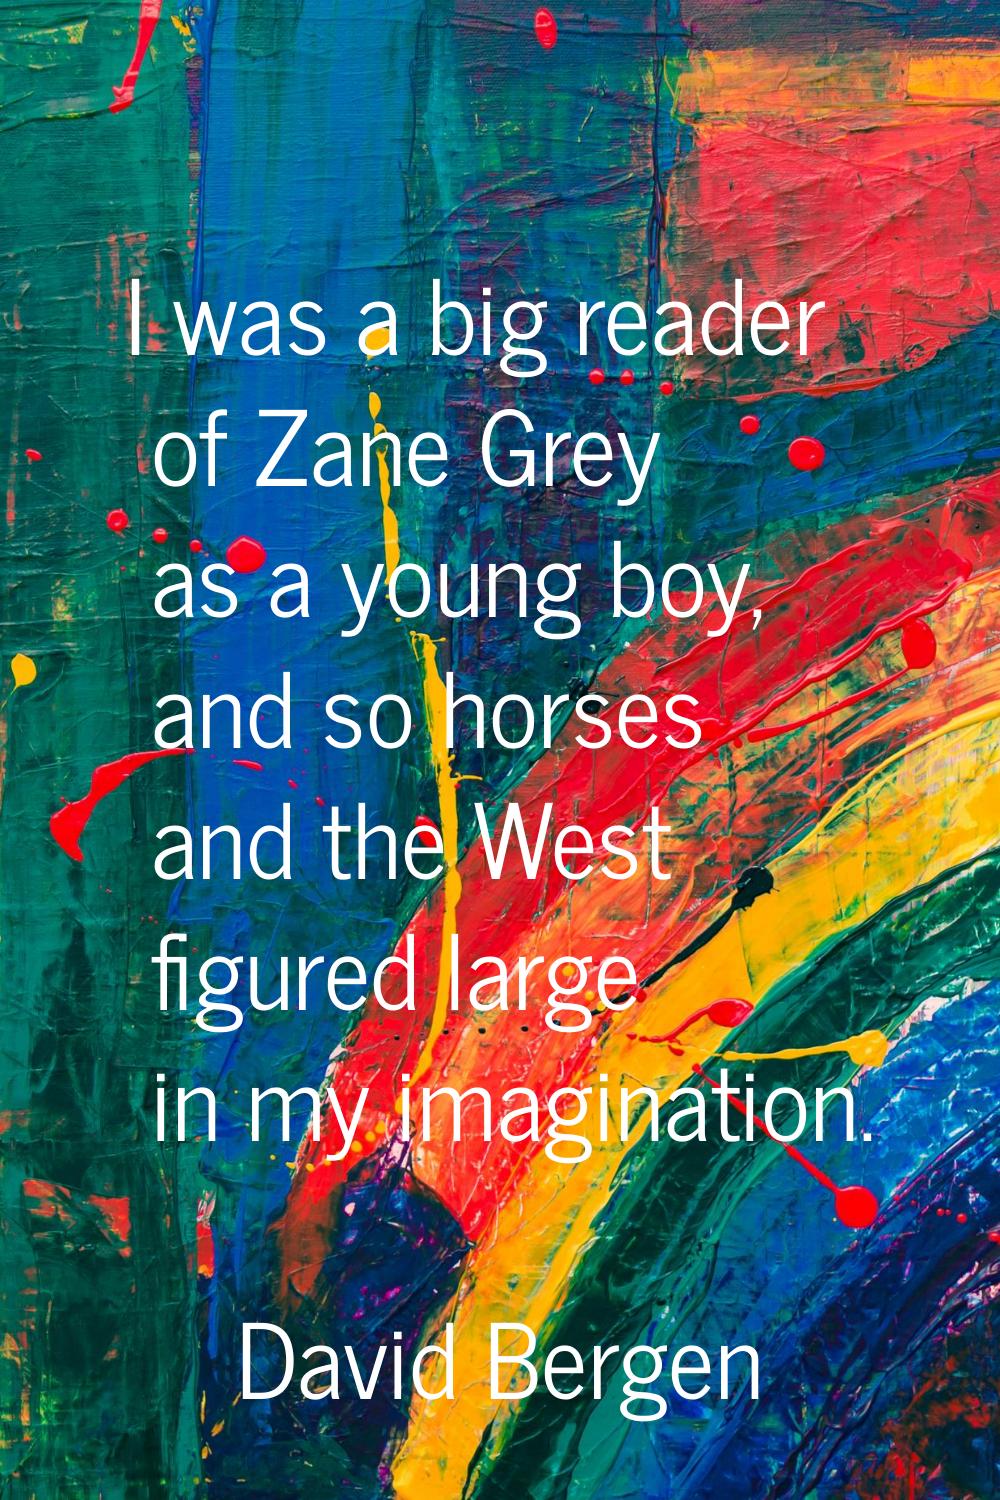 I was a big reader of Zane Grey as a young boy, and so horses and the West figured large in my imag